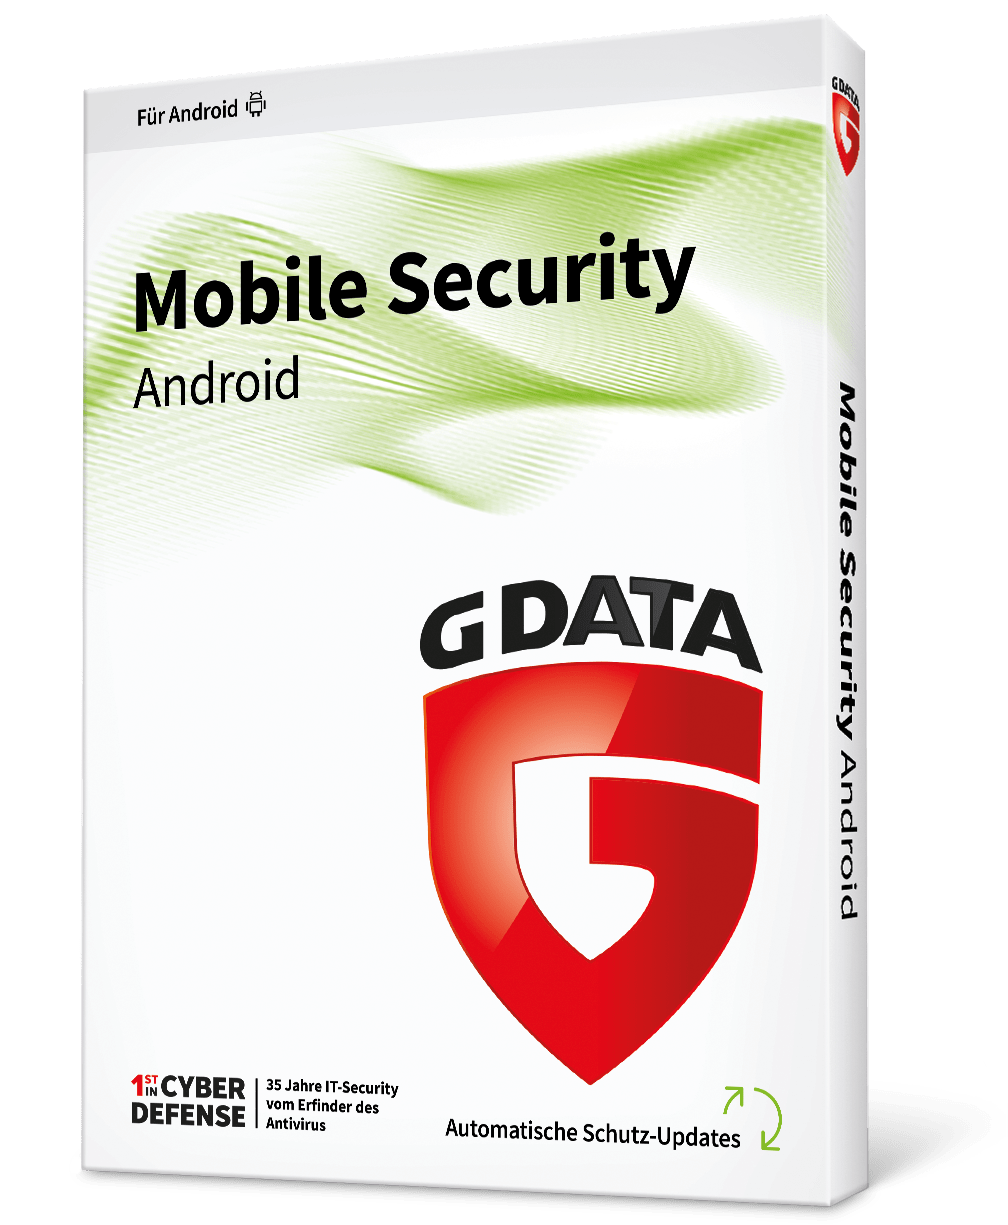 G DATA Mobile Security für Android